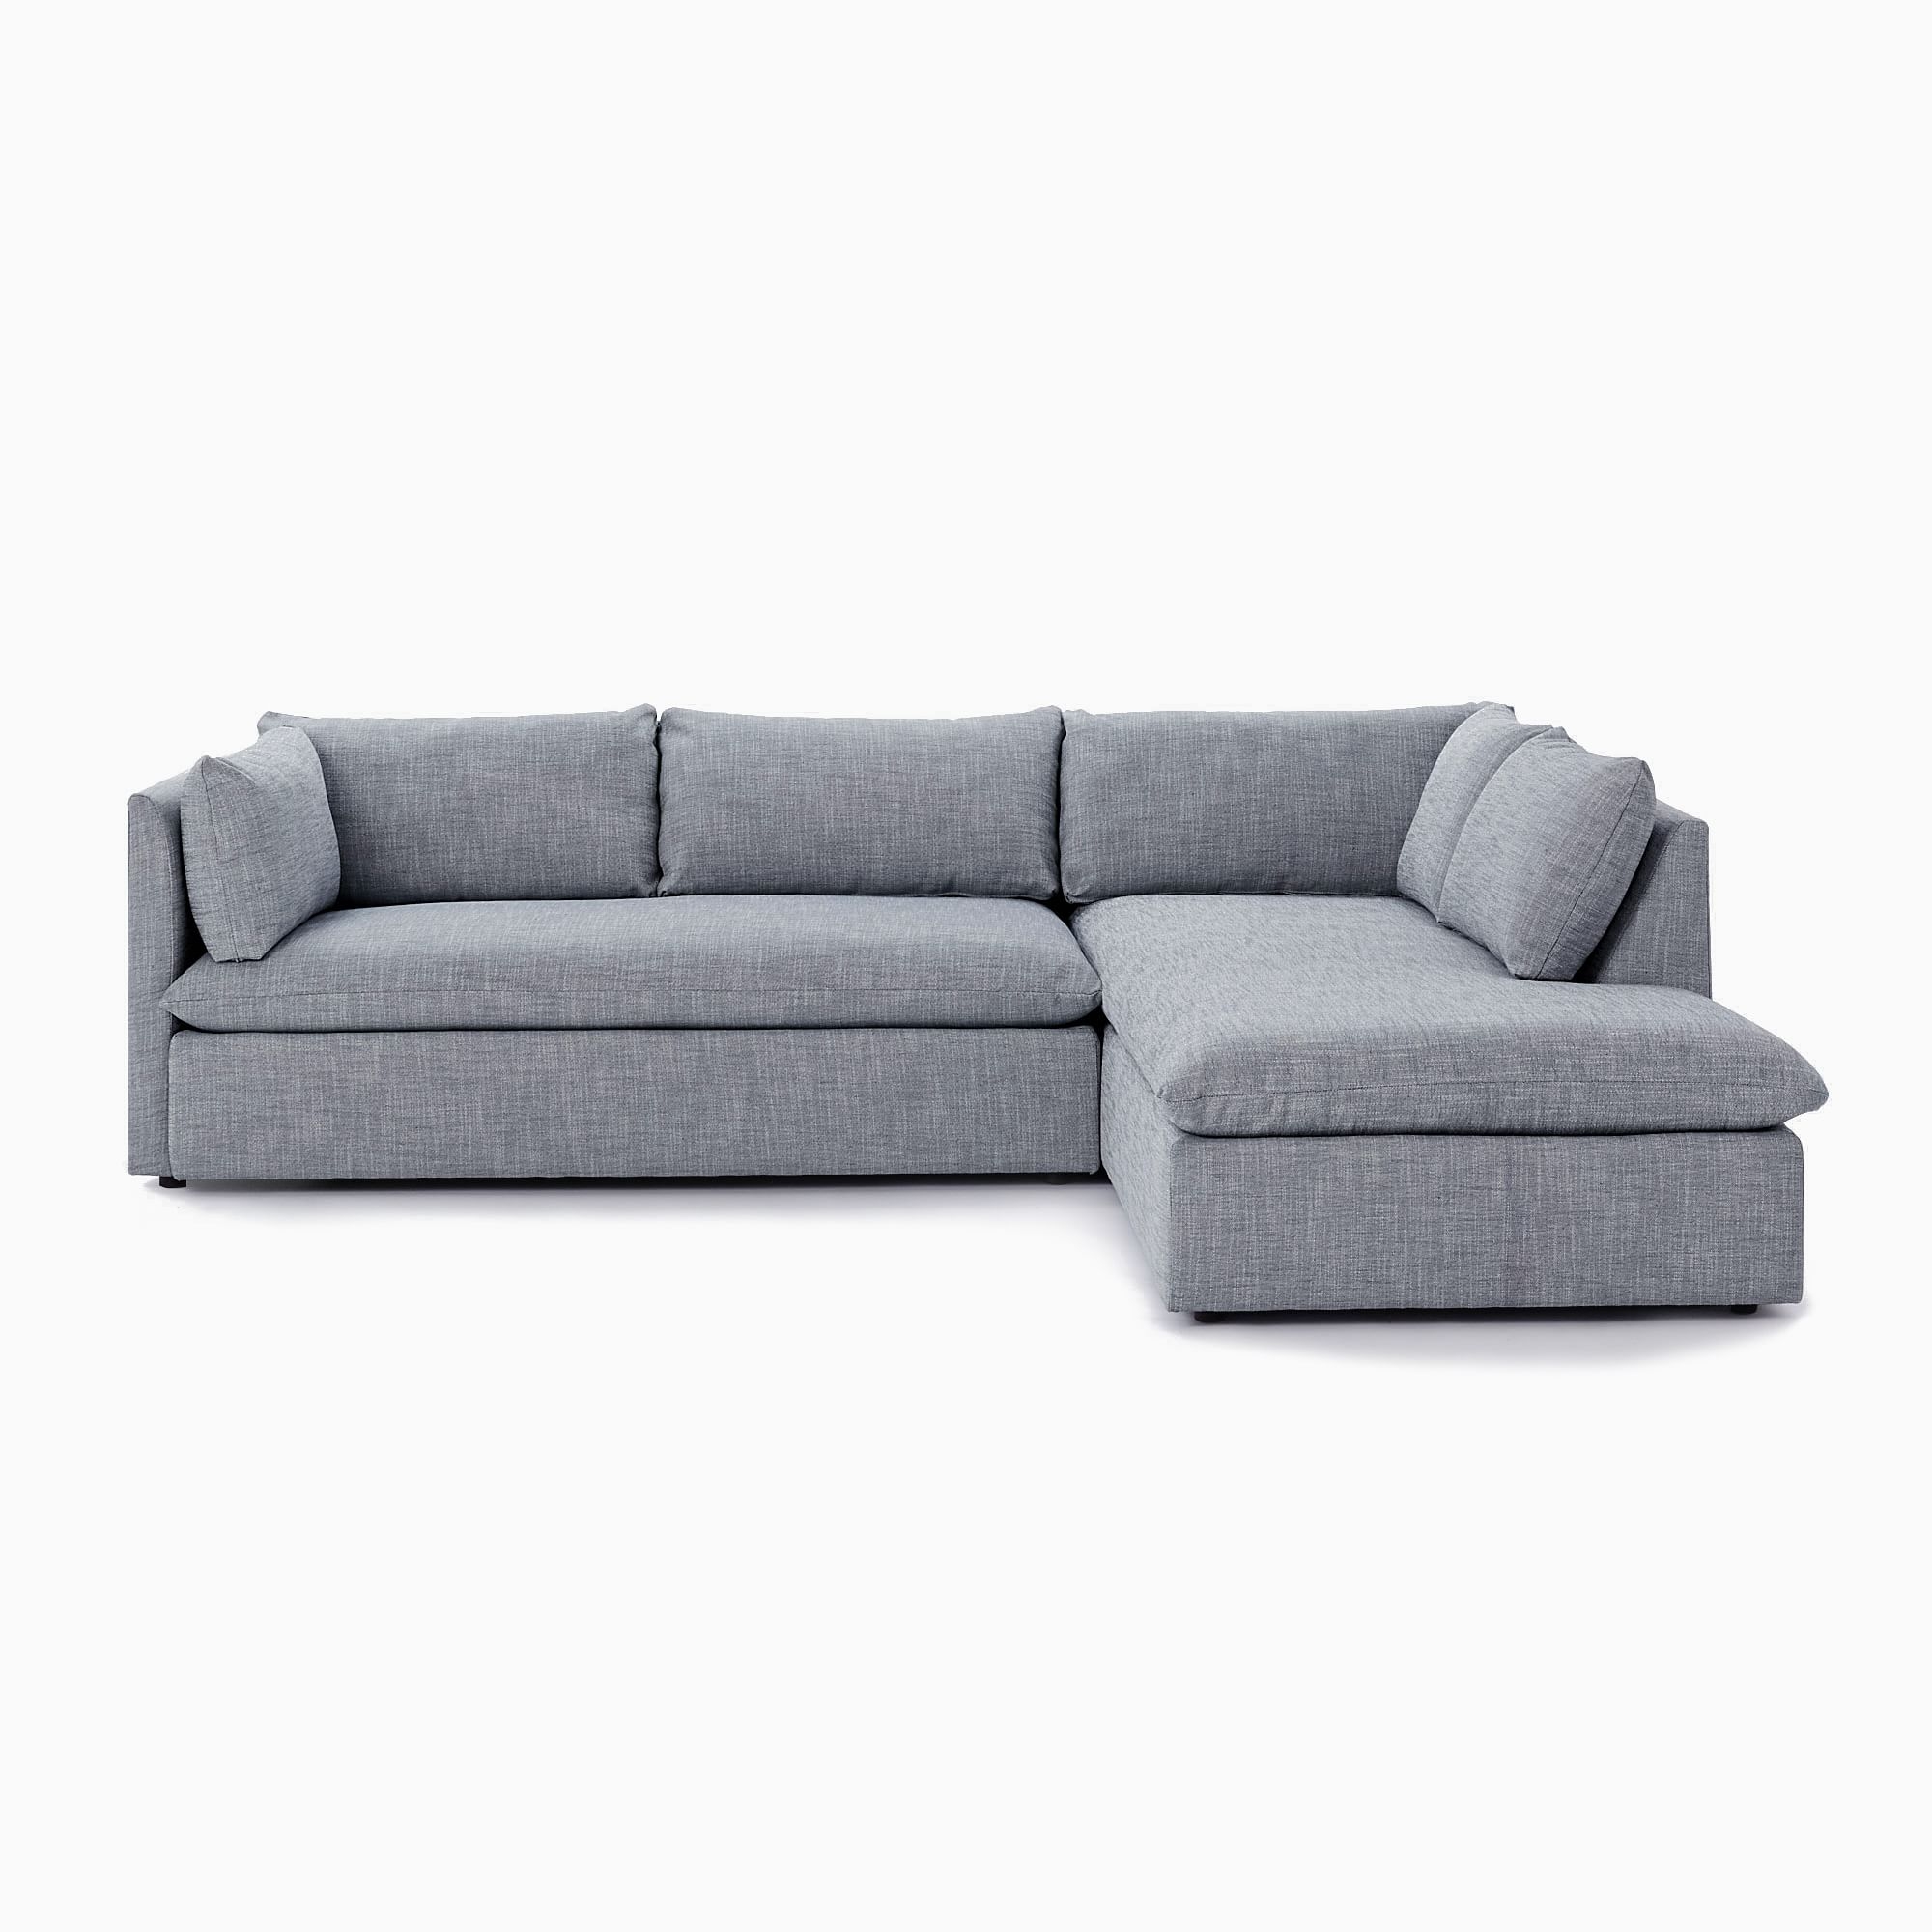 Shelter 106" Left 2-Piece Bumper Chaise Sectional, Yarn Dyed Linen Weave, graphite - Image 3